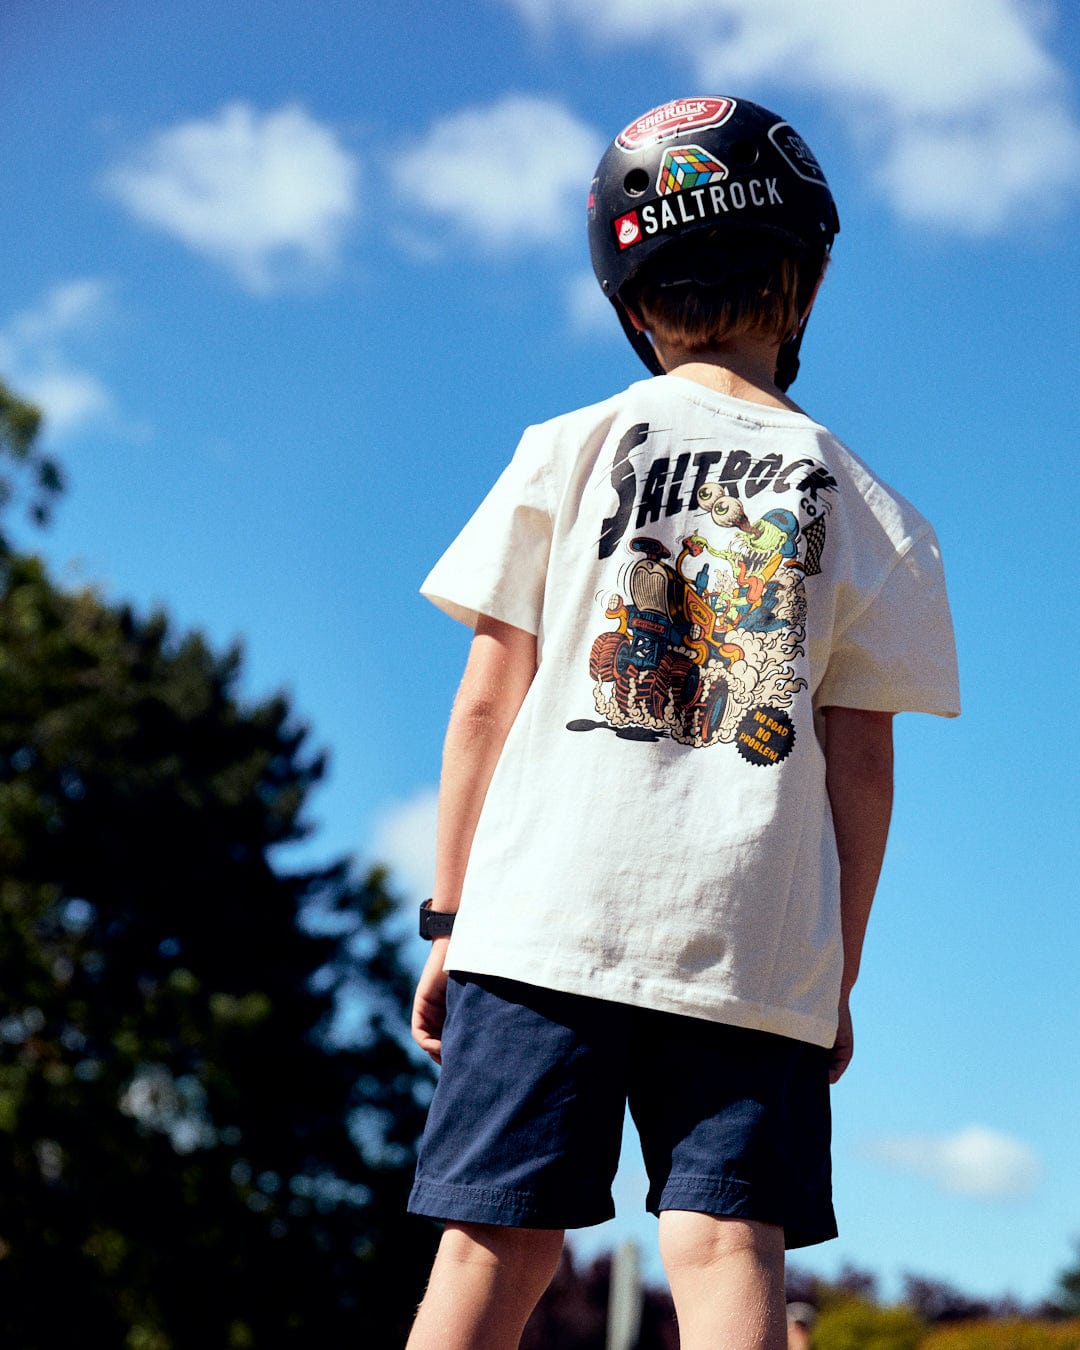 A child wearing a helmet and a Saltrock No Road No Problem - Kids Short Sleeve T-Shirt - White with vibrant Saltrock illustrations stands outdoors under a blue sky.